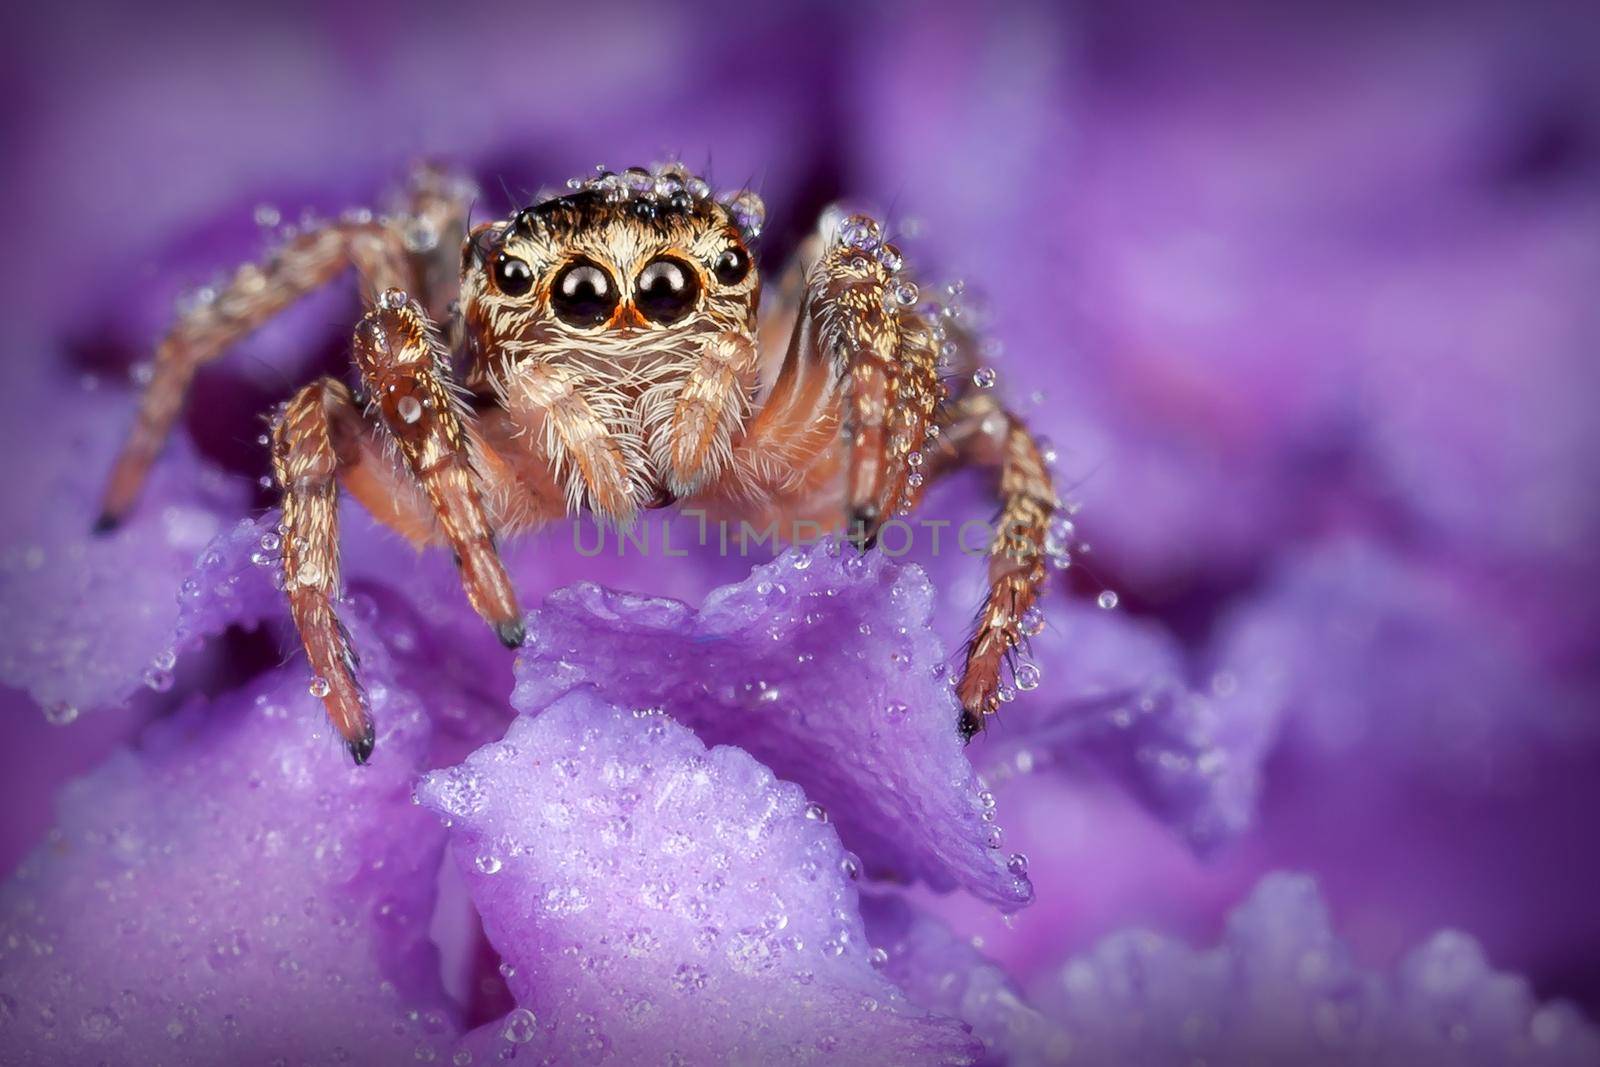 Jumping spider on the rich purple flower